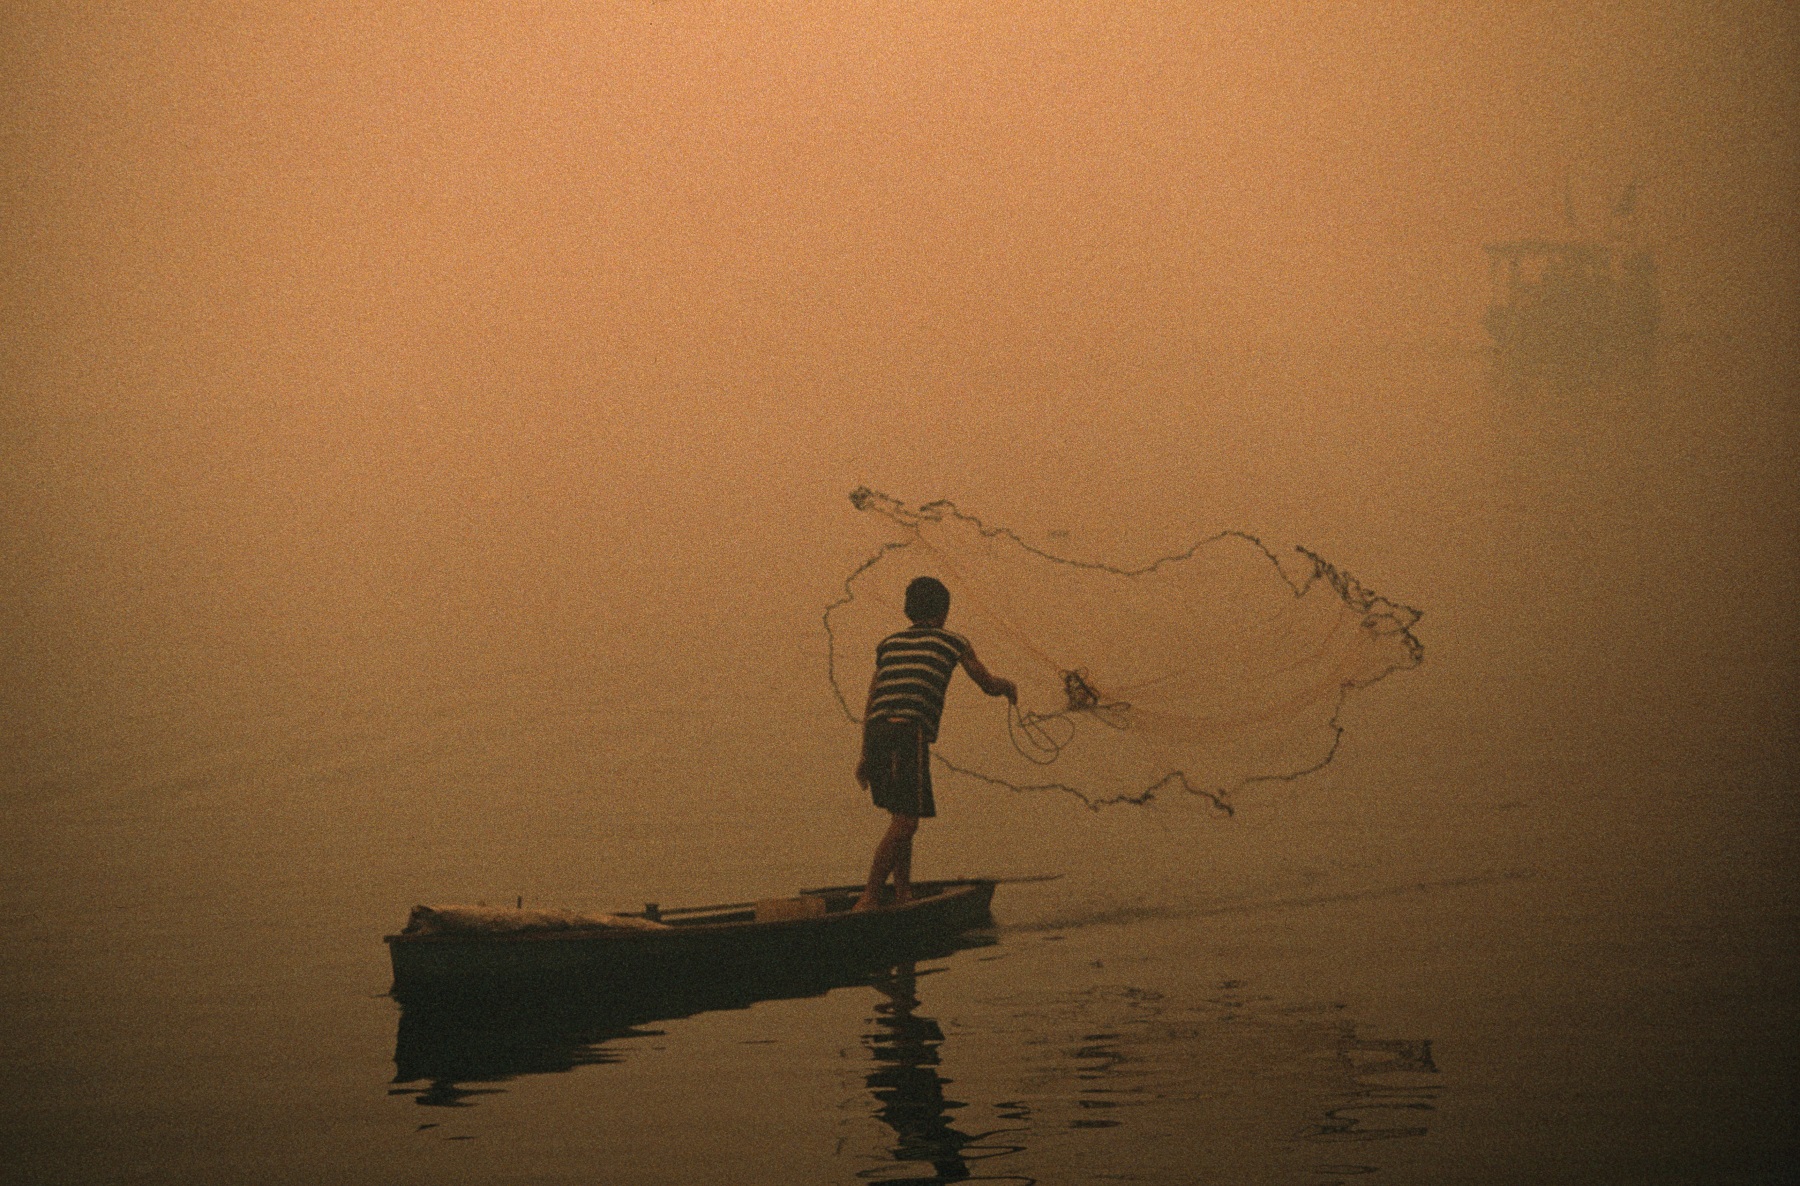 A boy casts his fishing net amidst smog from forest fires.